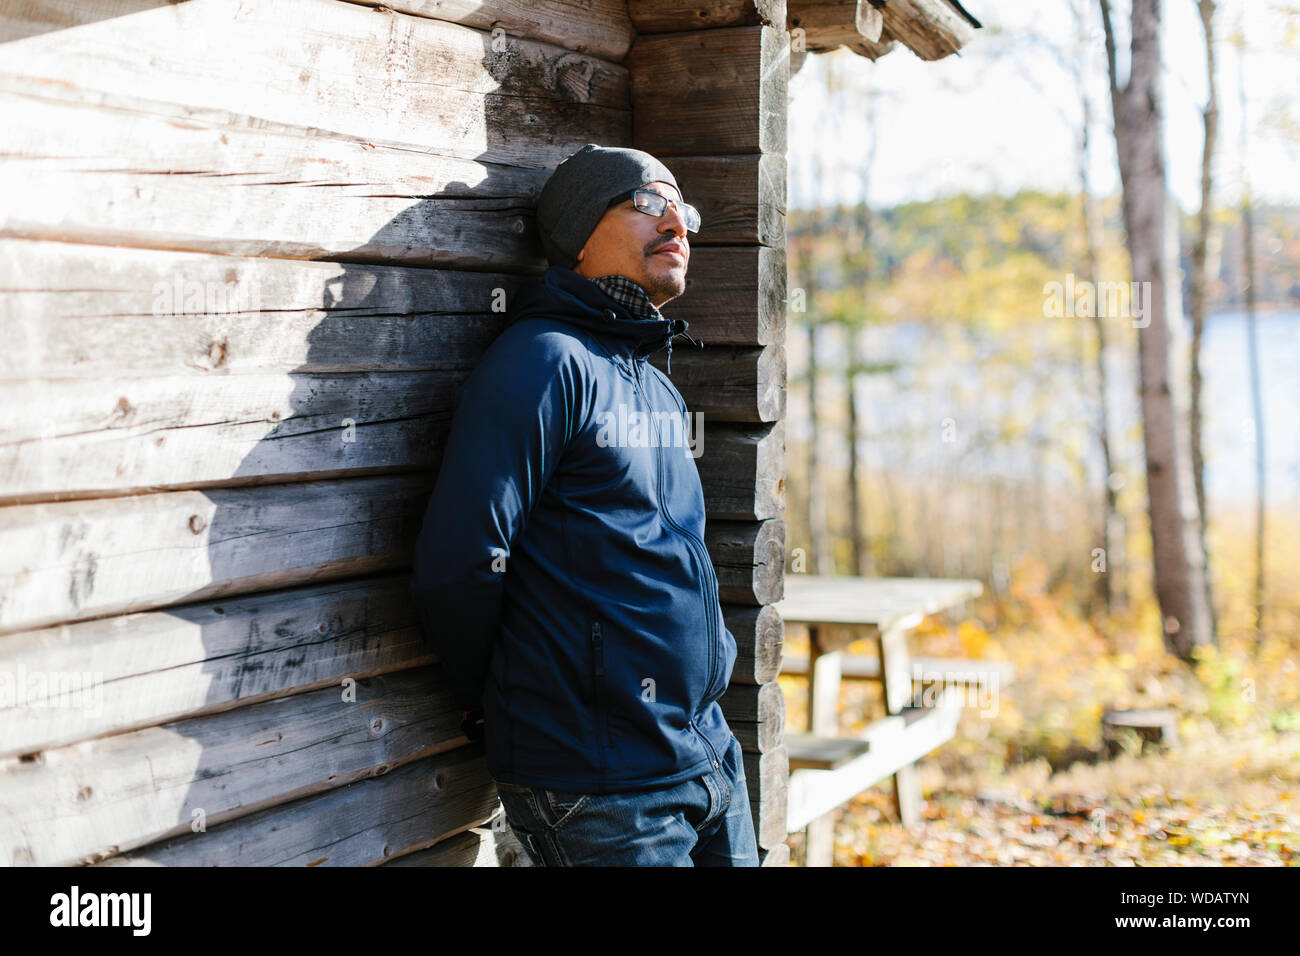 Man wearing beanie and jacket leaning on log cabin Stock Photo